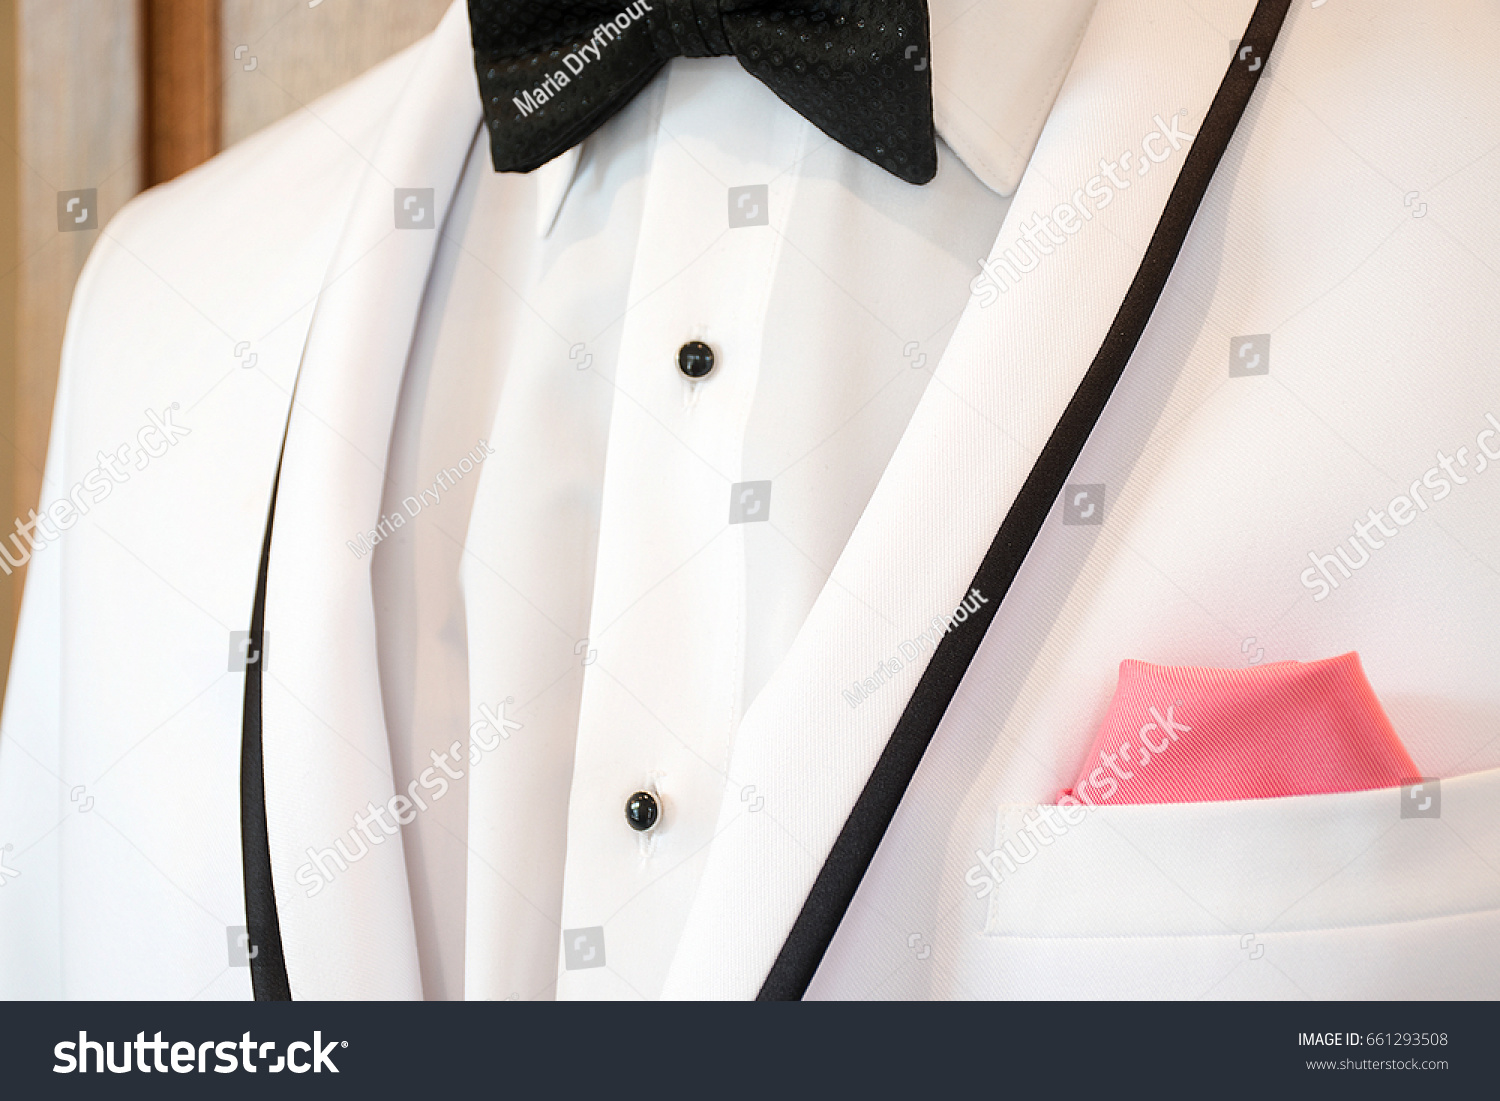 white tuxedo with black accent trim with bow tie and pink handkerchief in pocket #661293508